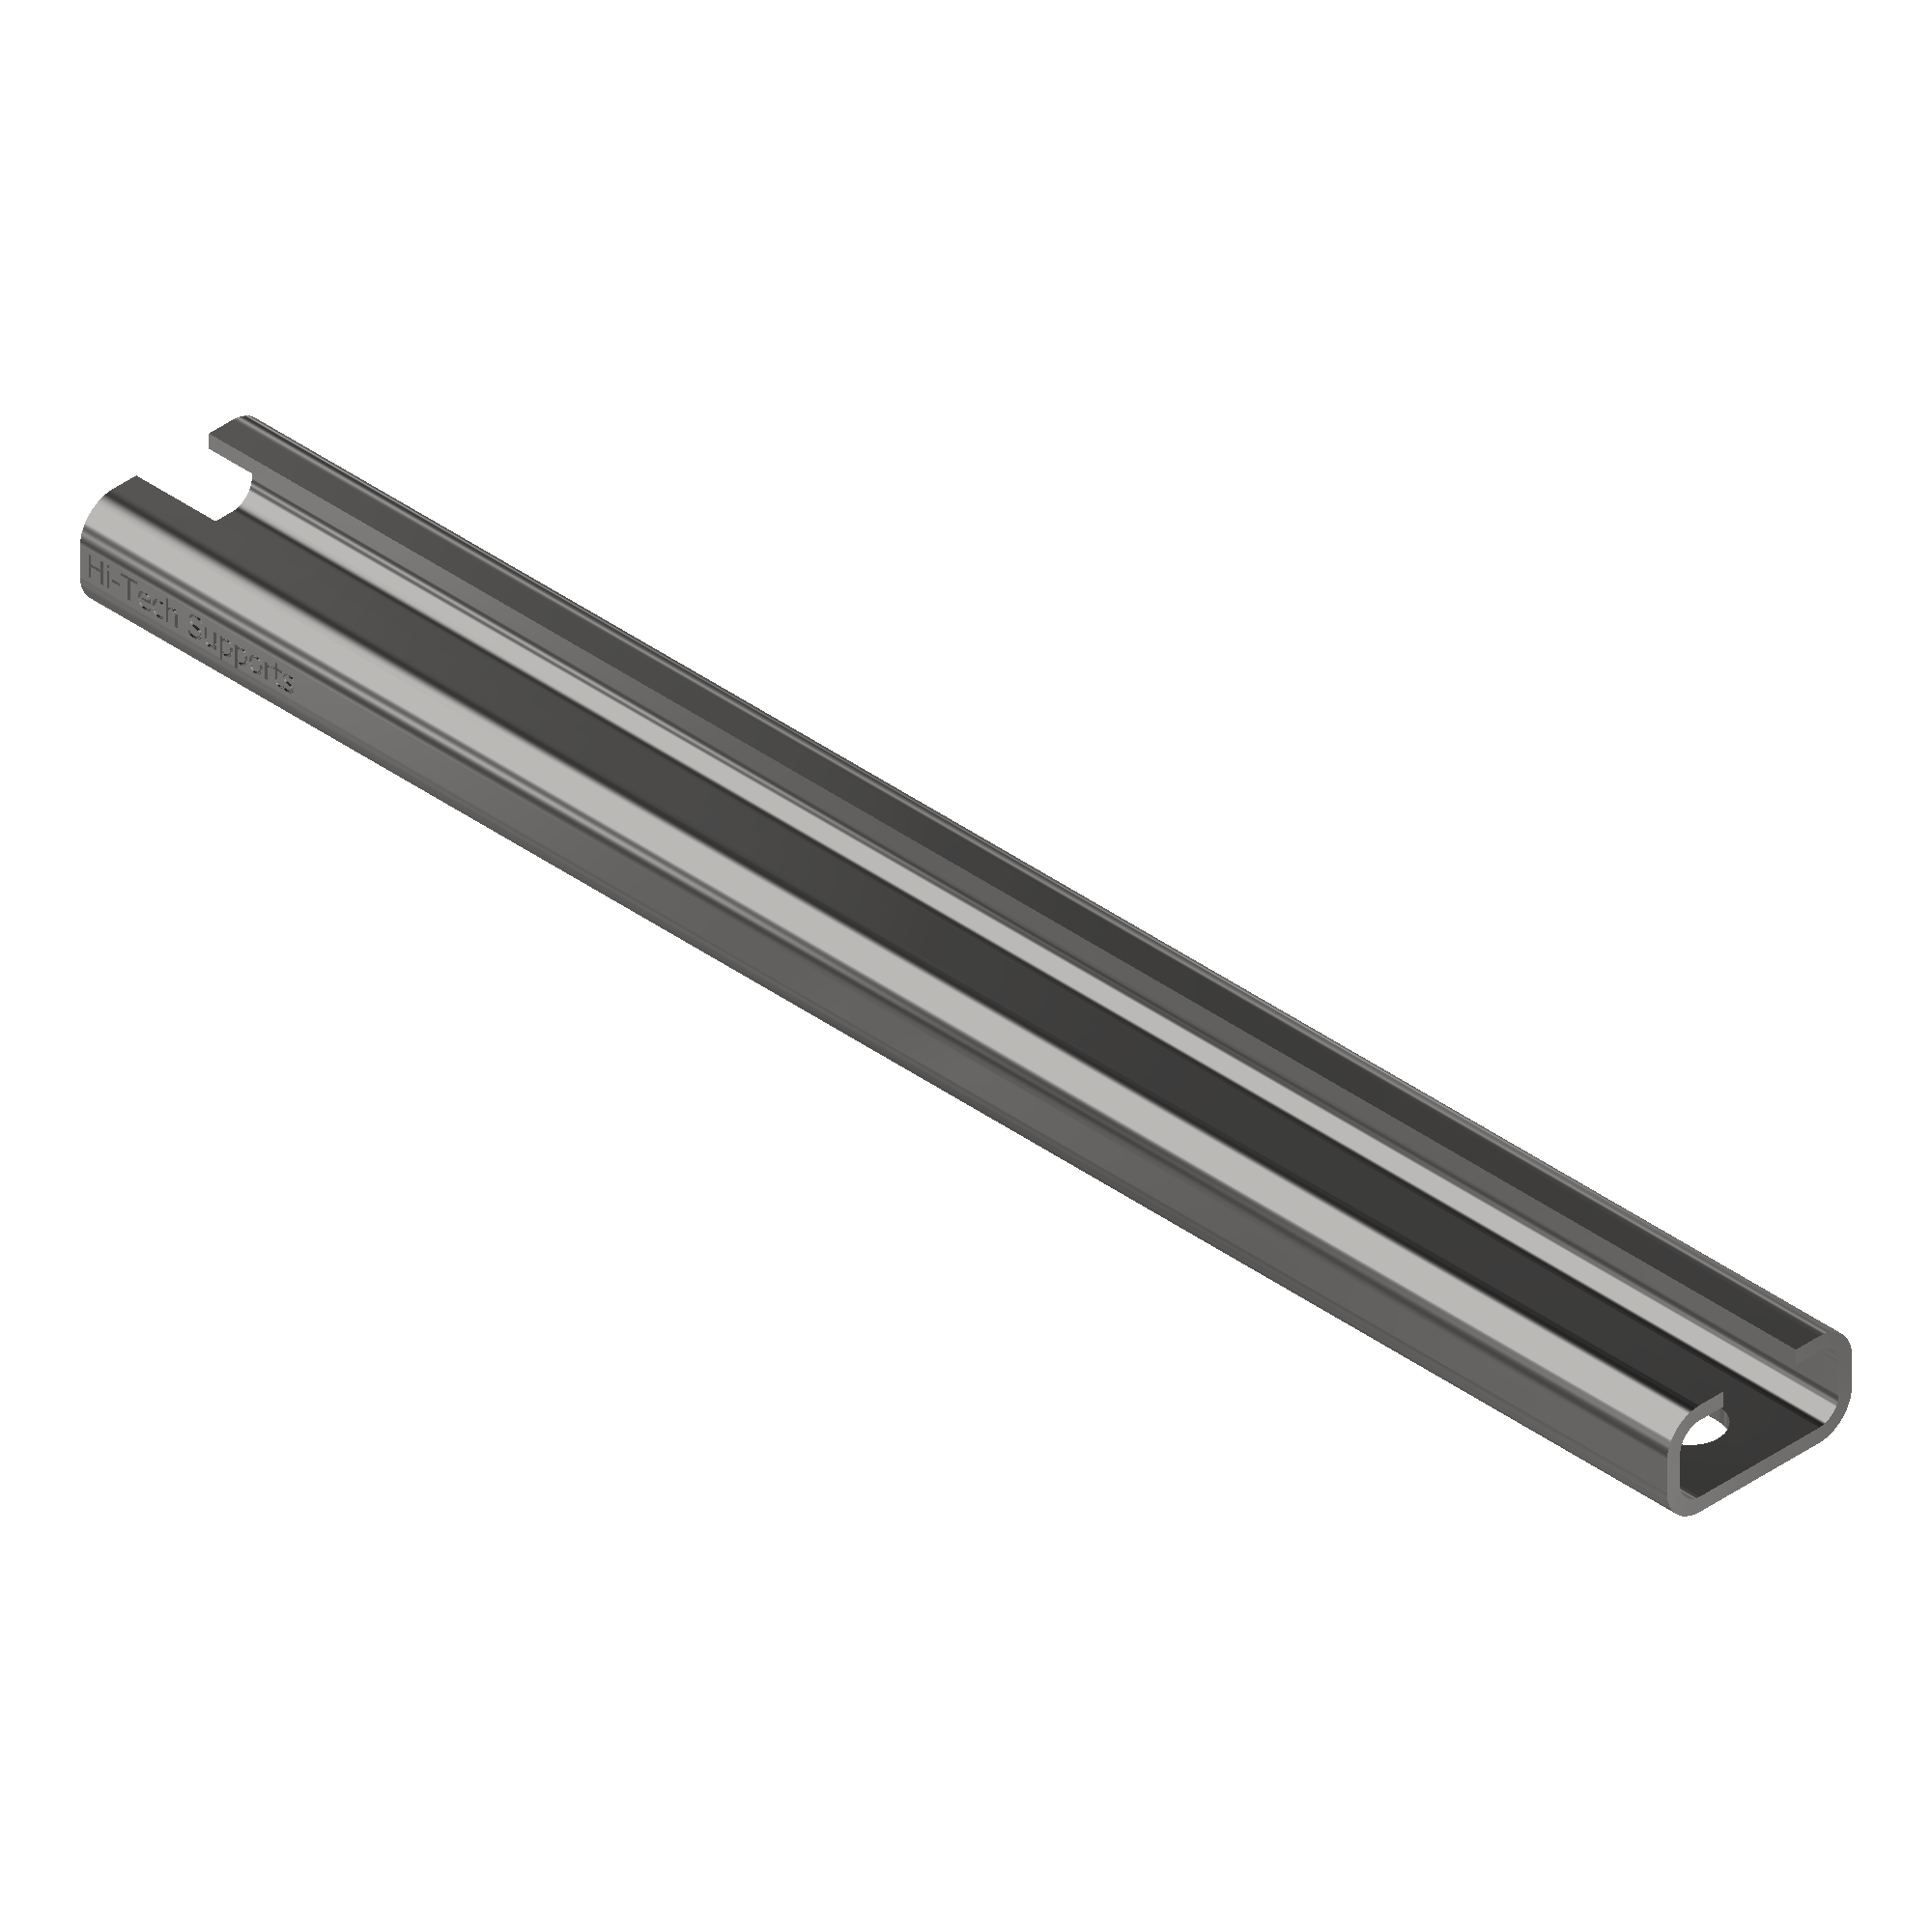 3D Image of Slotted Rail STD